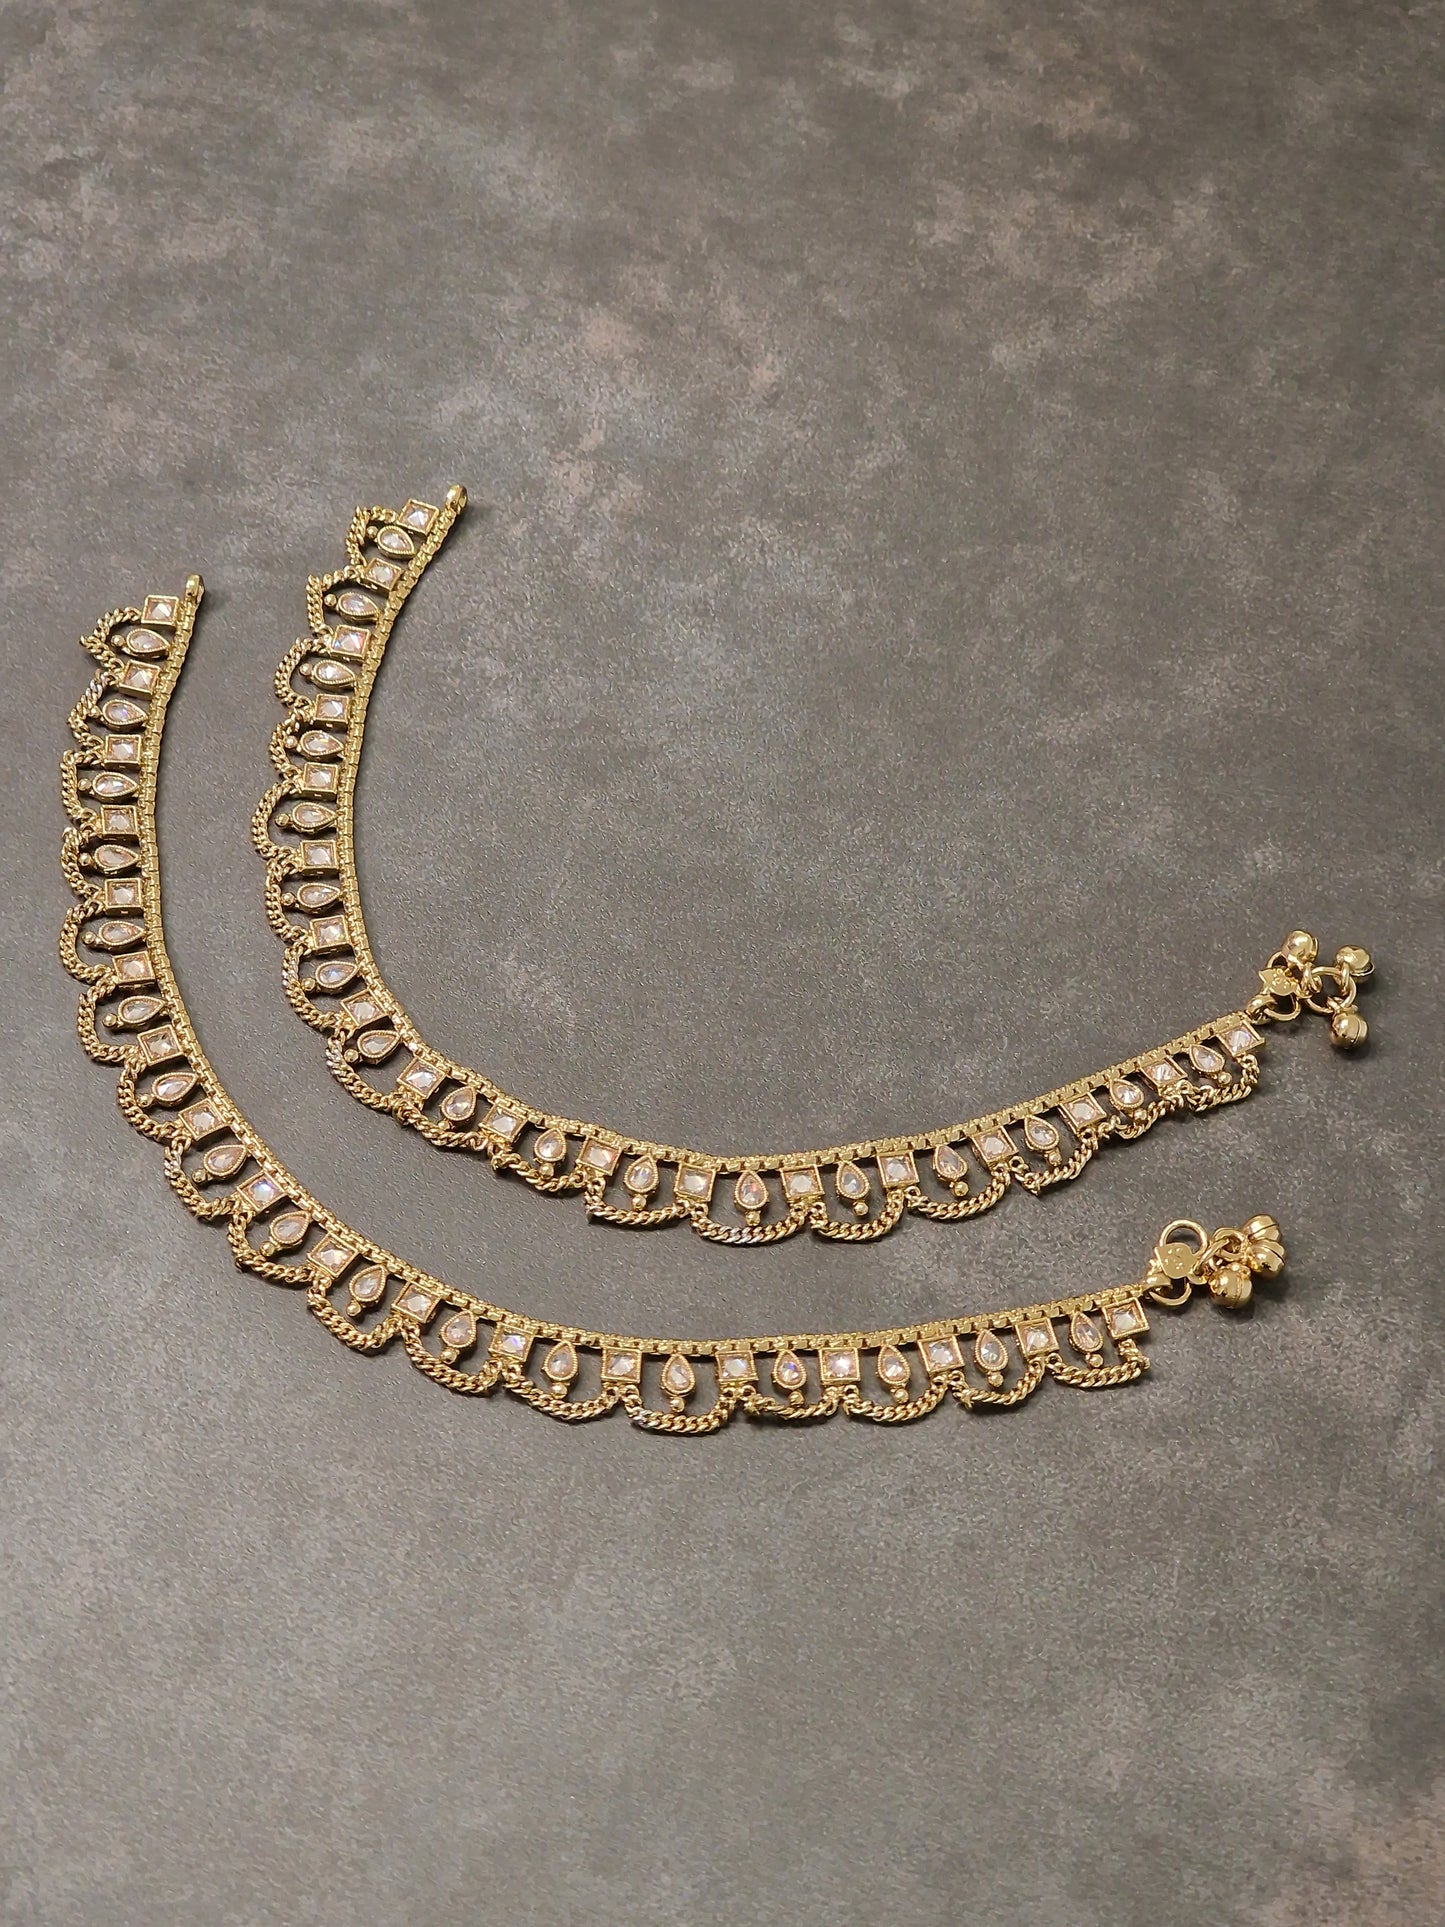 Link Chain Anklets - Available in gold and silver